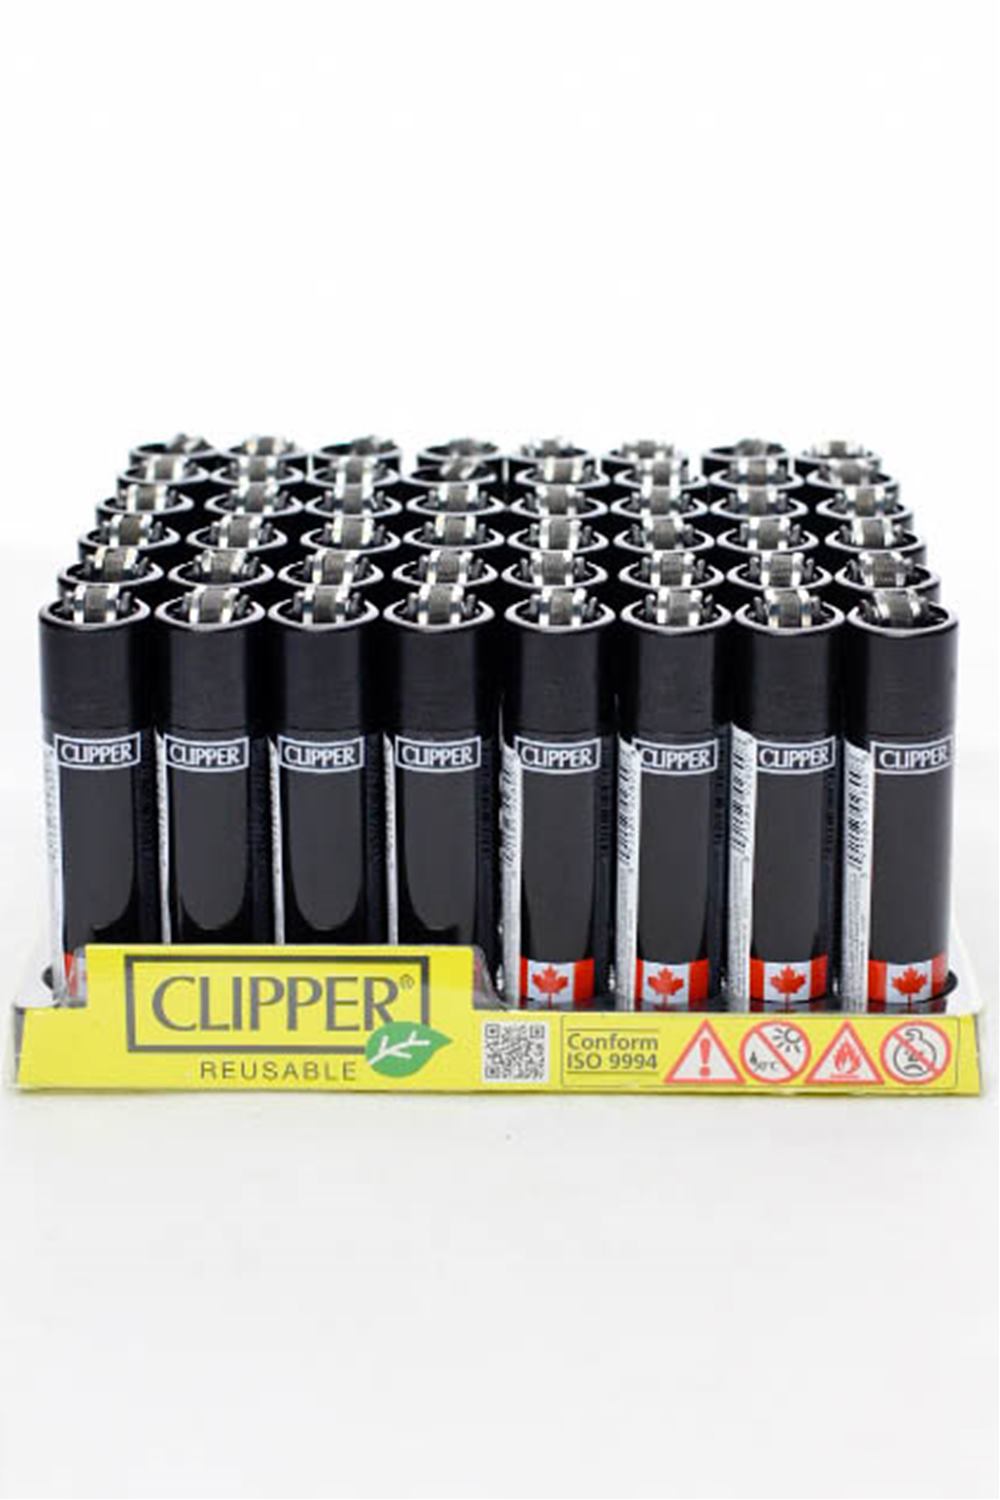 Clipper Refillable Lighters_9